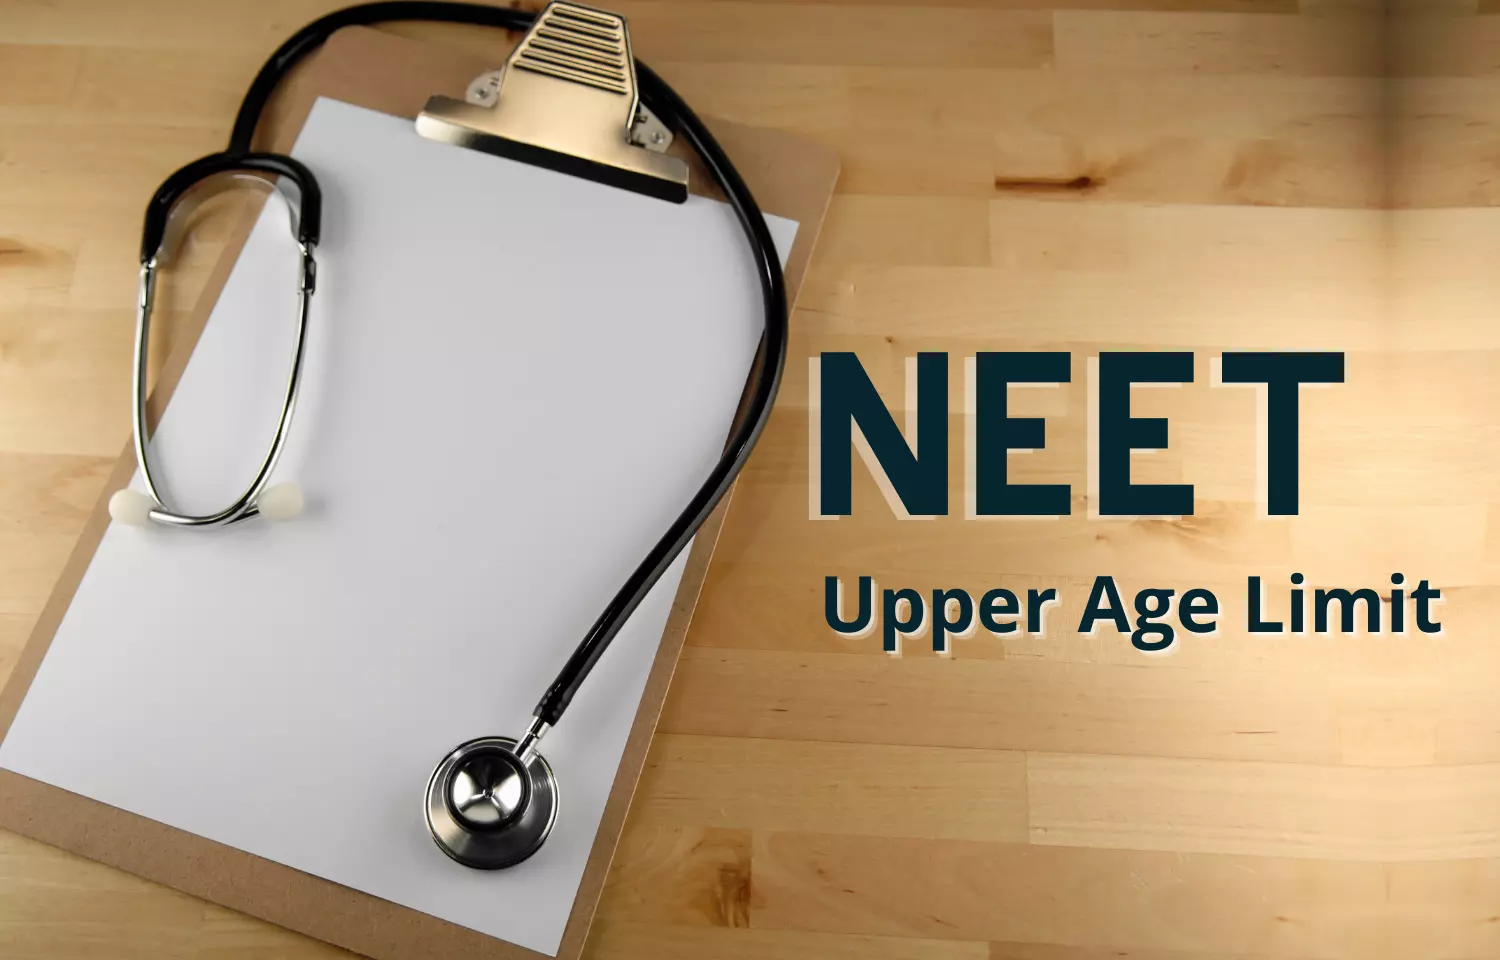 No Upper Age Limit for NEET: NMC confirms to Supreme Court